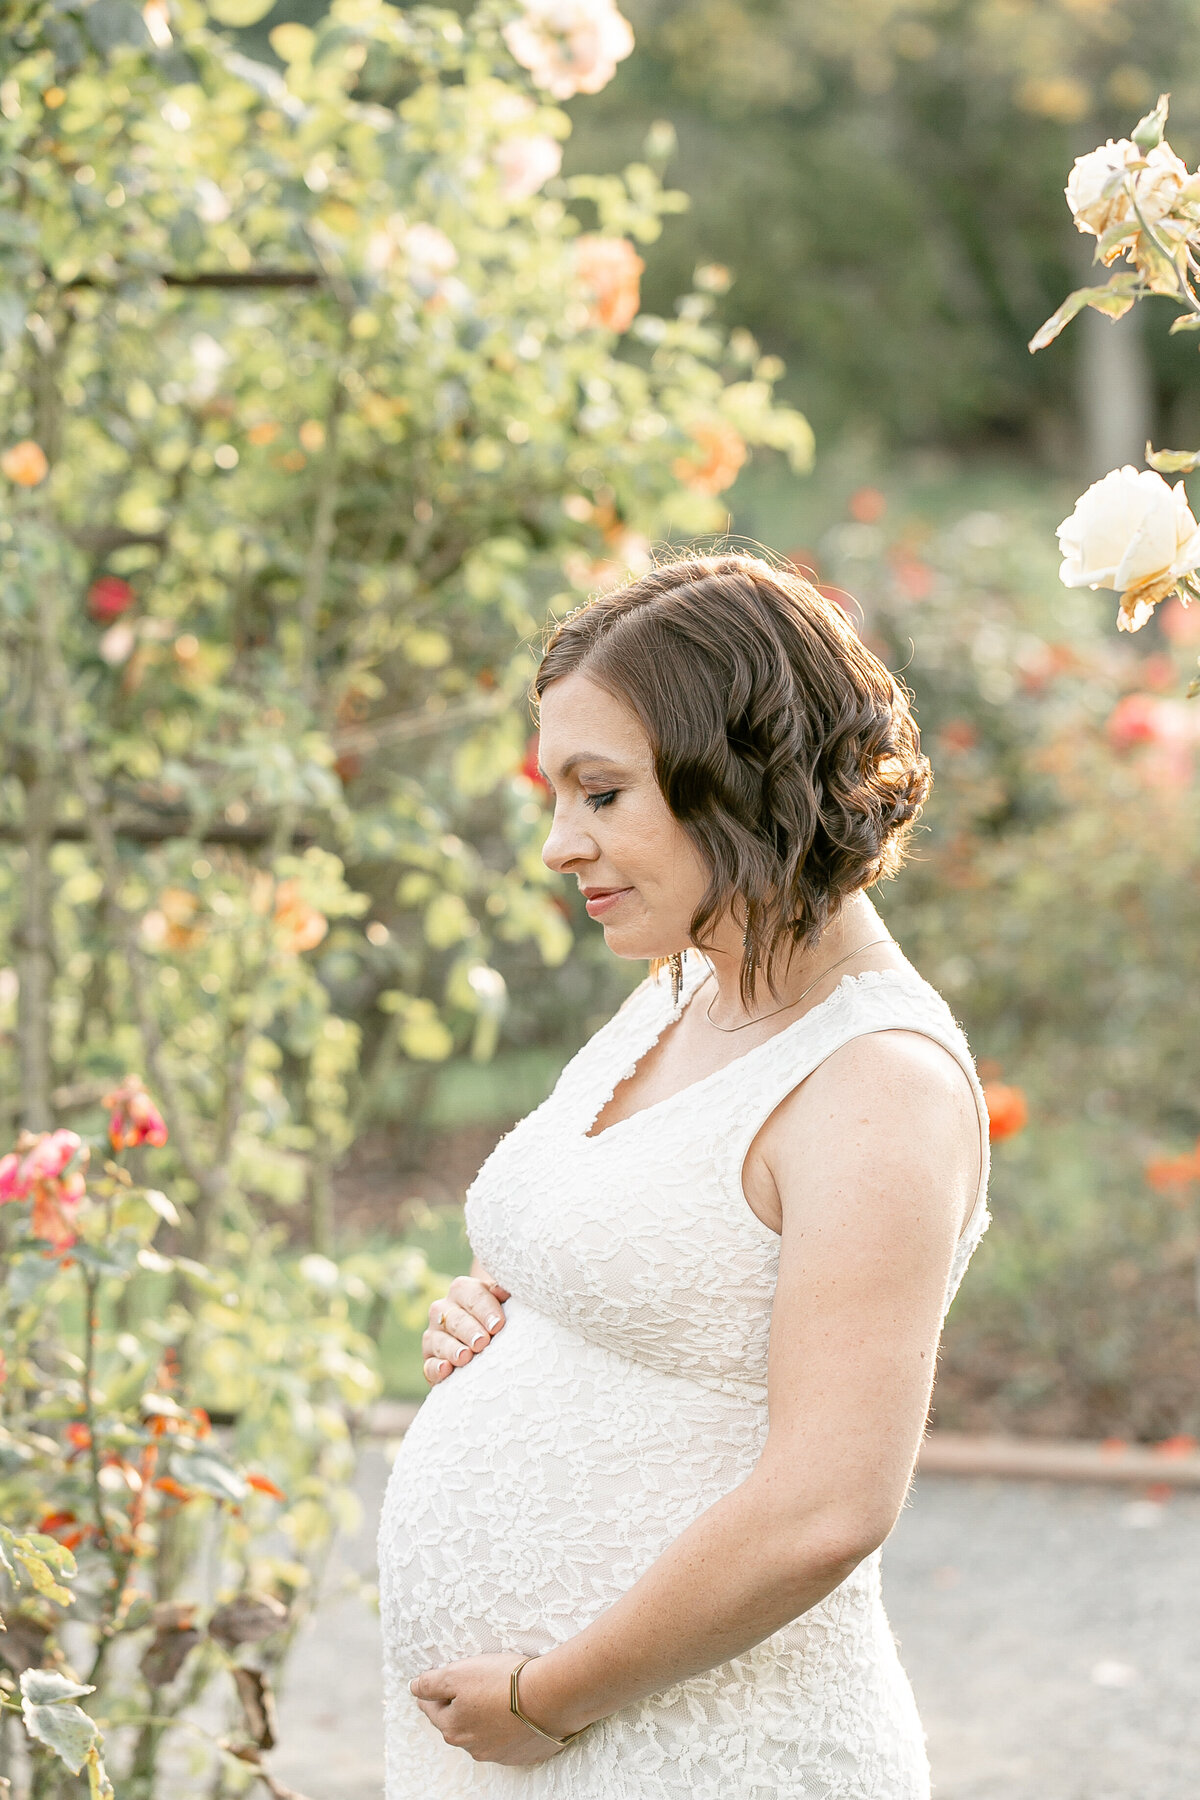 Pregnant Woman dressed in white lace sleeveless dress standing in Portland Rose Garden. Photography Session with Portland Maternity Photographer